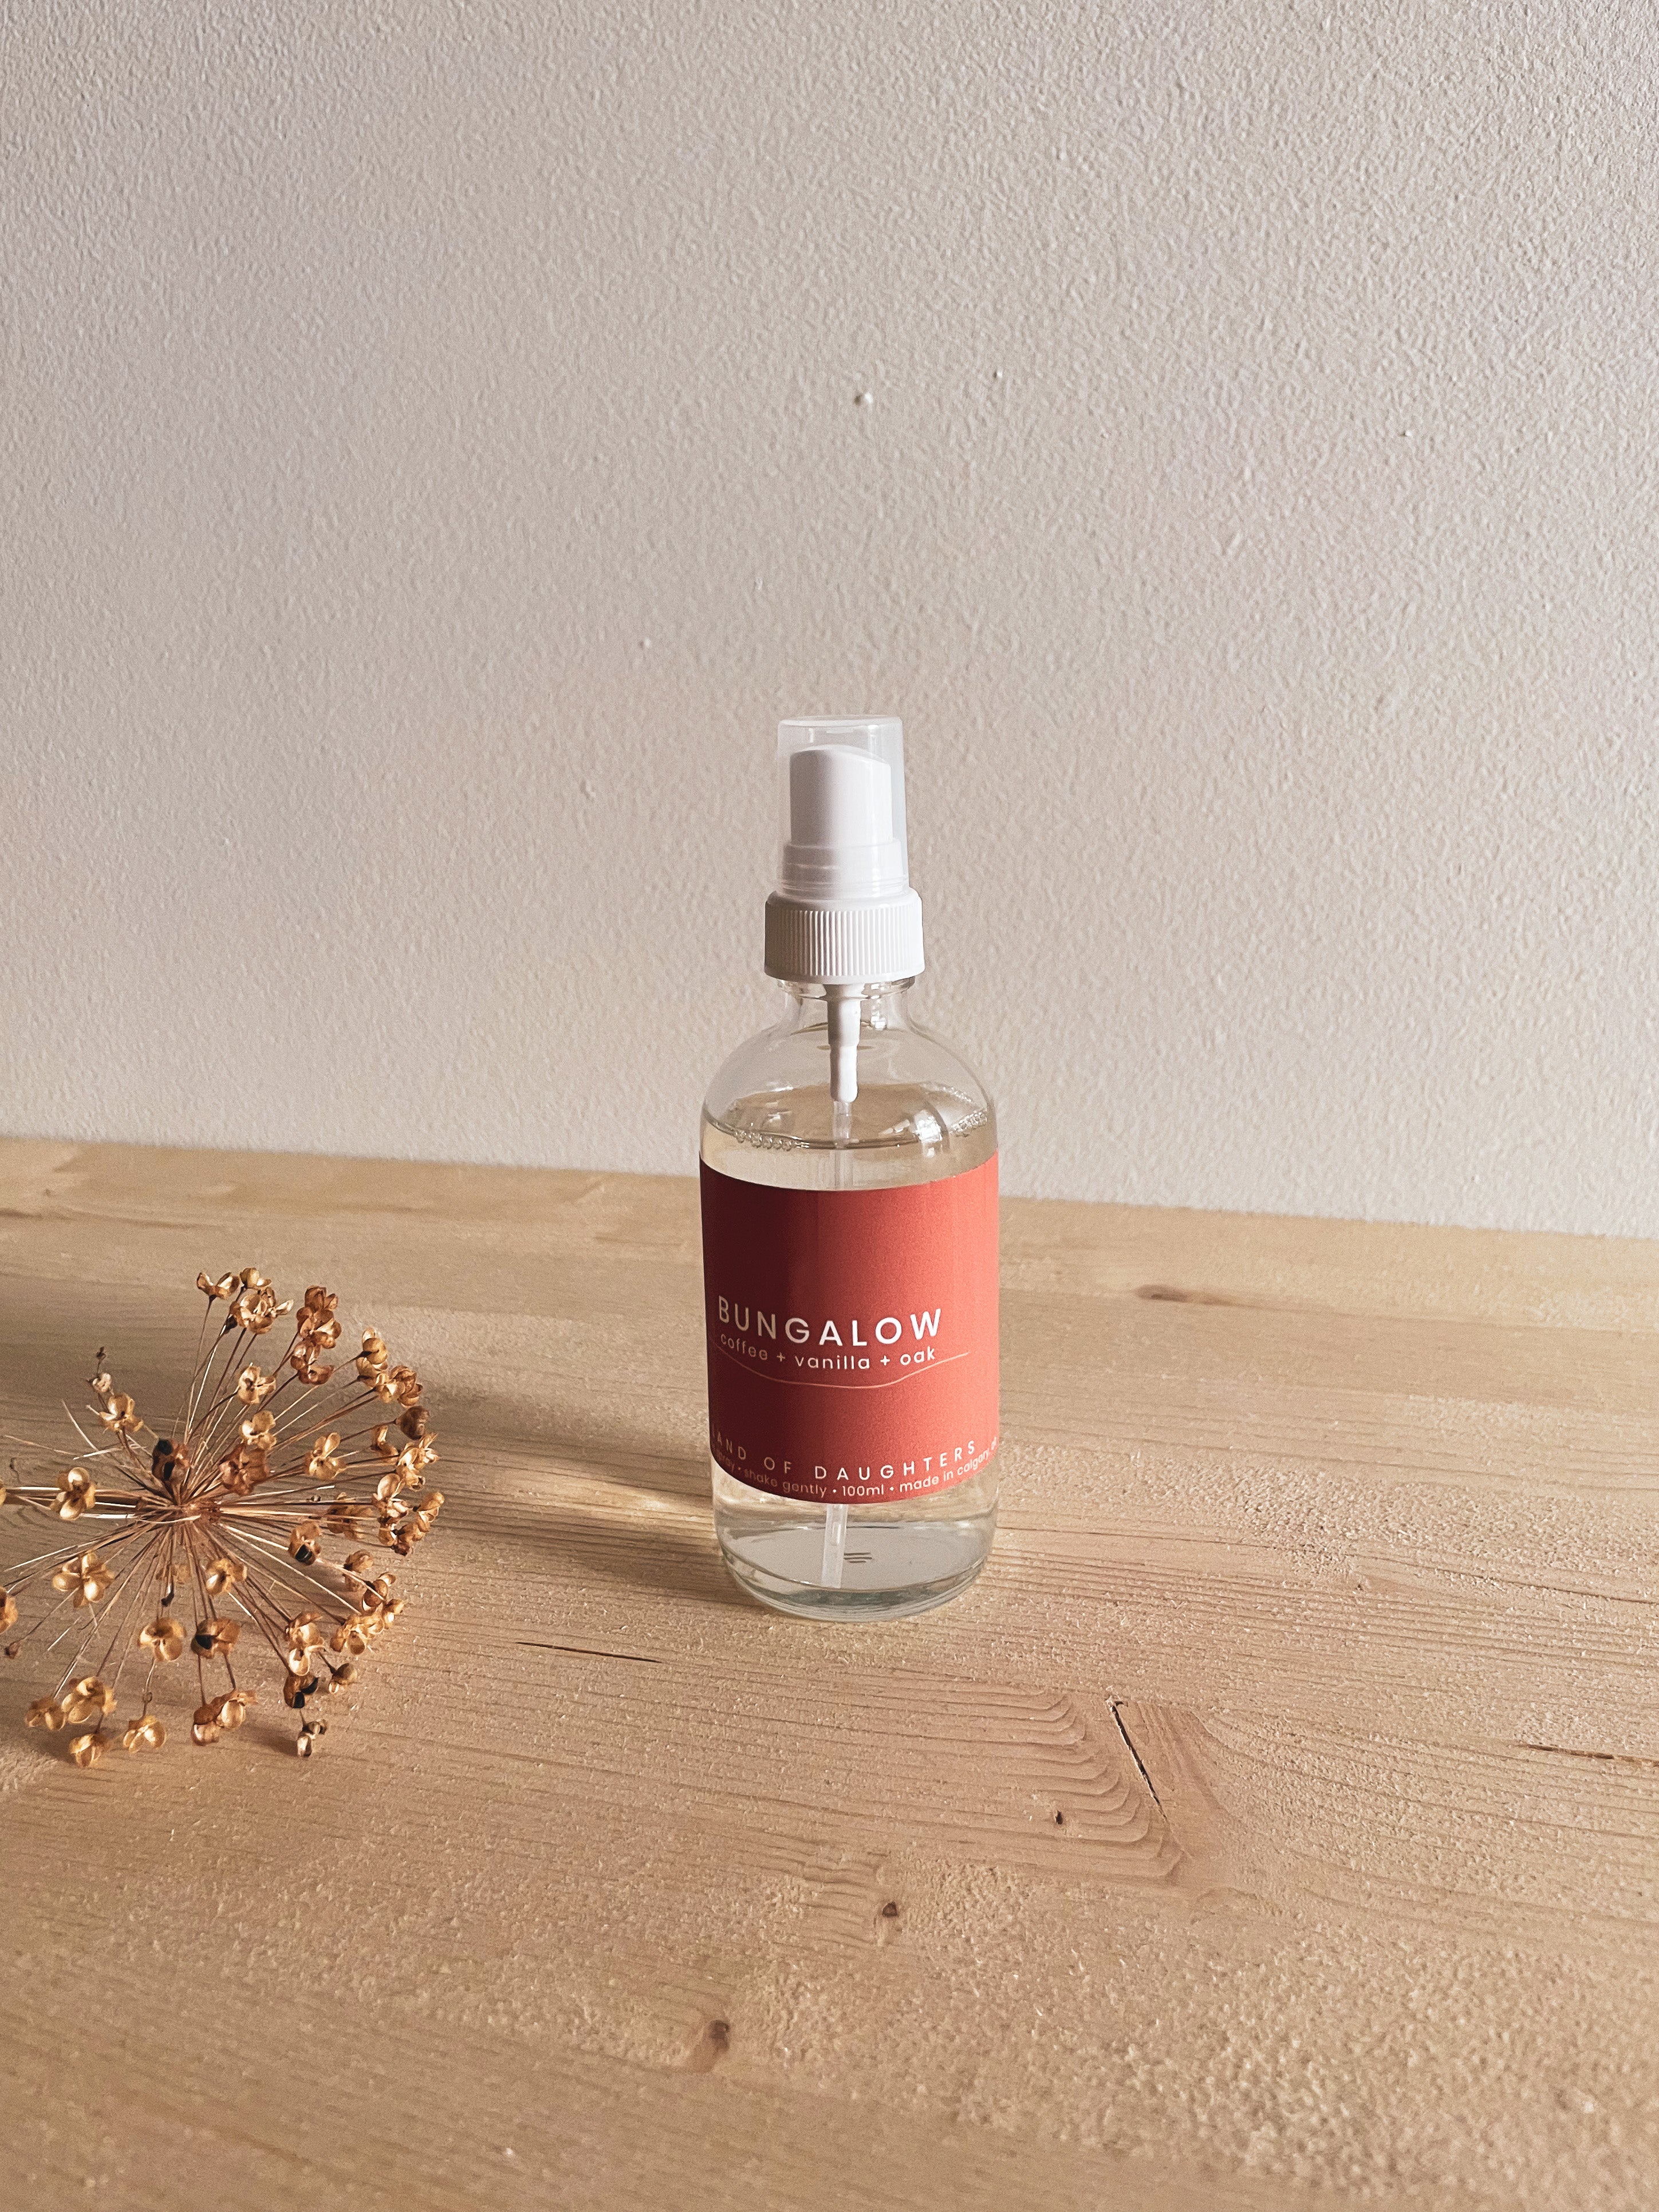 bungalow aroma spray by land of daughters